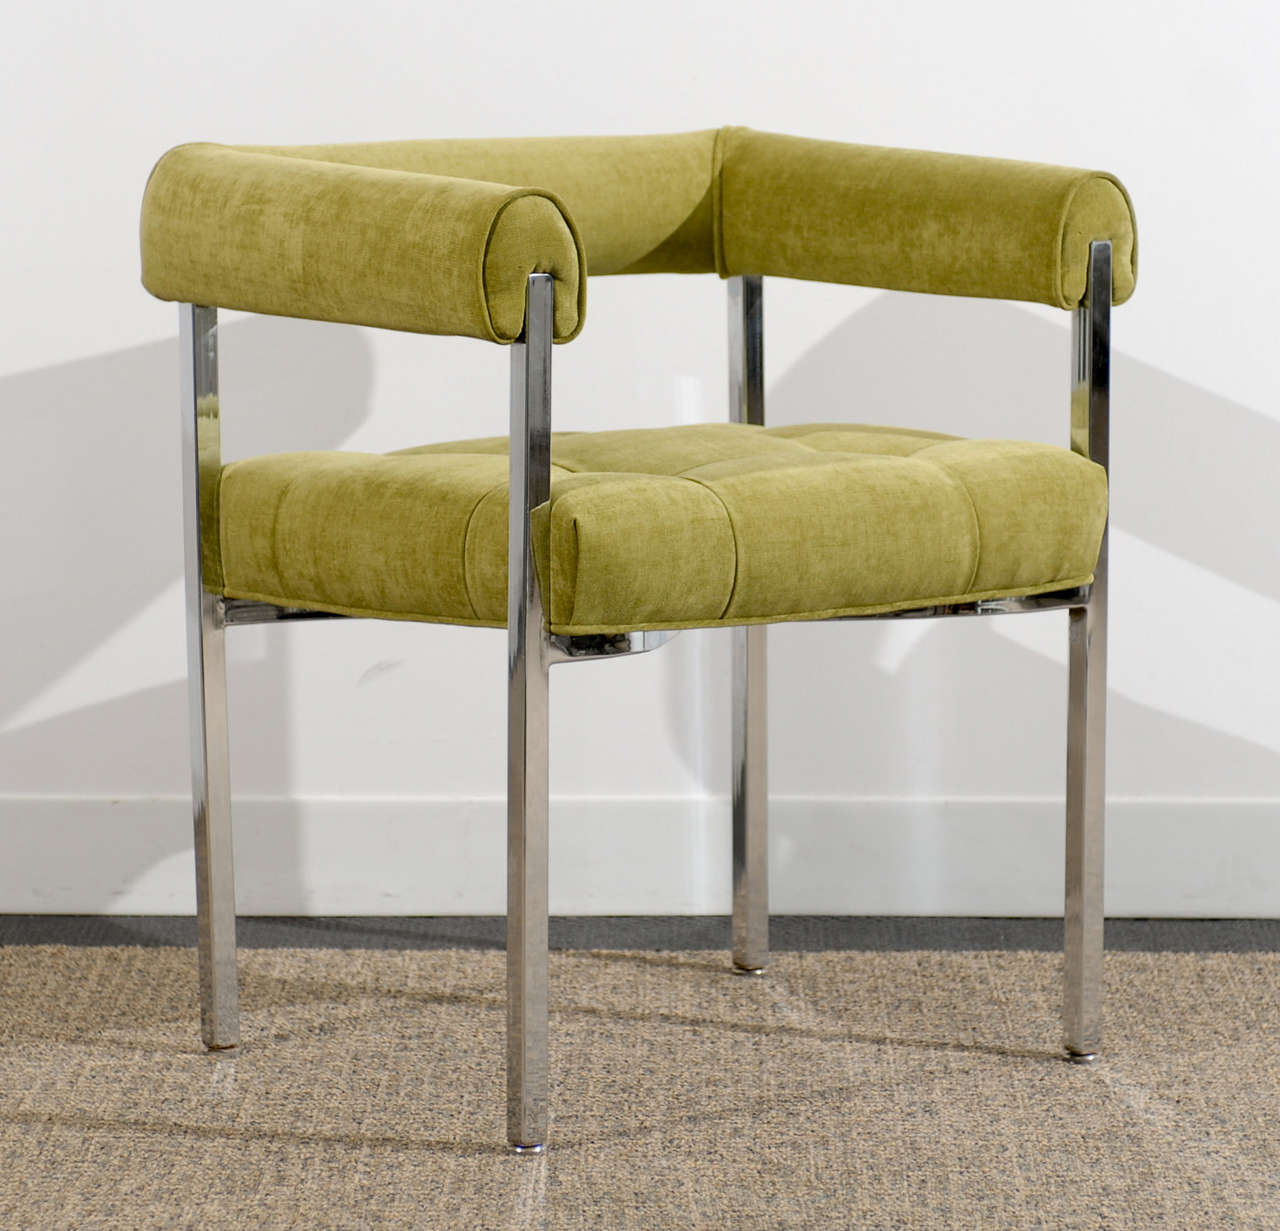 A great, comfortable pair of chrome armchairs in the style of Milo Baughman. Produced by Howell, Circa 1970. Upholstered in lime chenille fabric. Excellent Restored Condition. The chrome is in Excellent Condition as well. The price noted is for the